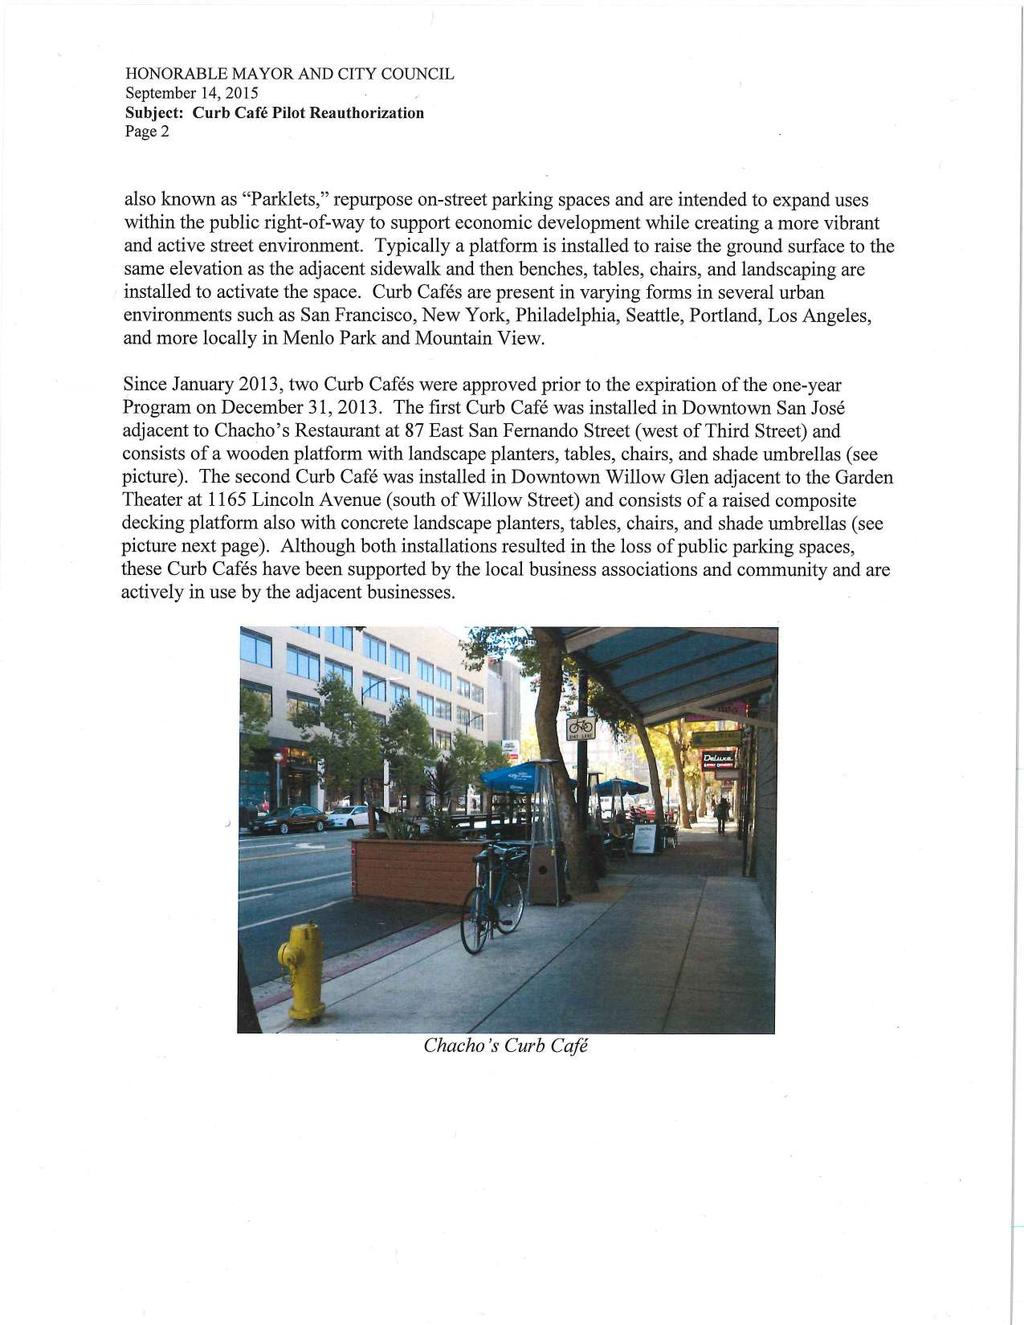 HONORABLE MAYOR AND CITY COUNCIL September 14, 2015 Subject: Curb Cafe Pilot Reauthorization Page 2 - also known as "Parklets," repurpose on-street parking spaces and are intended to expand uses